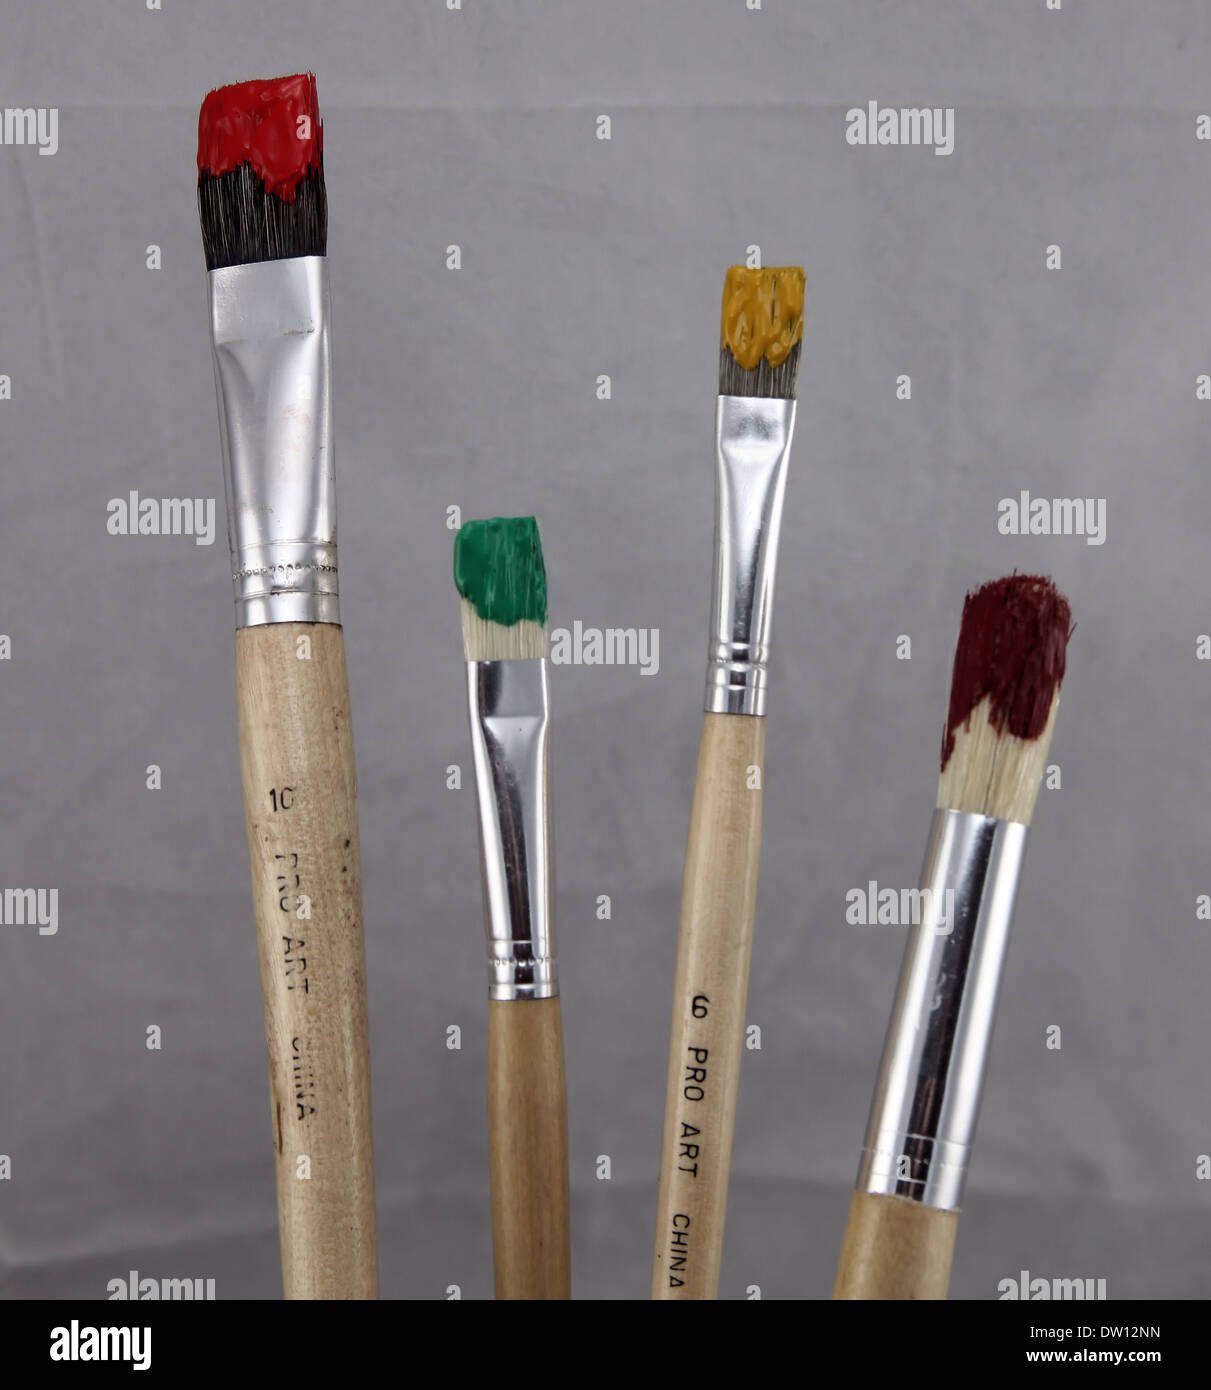 Small paint brush on white Cut Out Stock Images & Pictures - Page 3 - Alamy